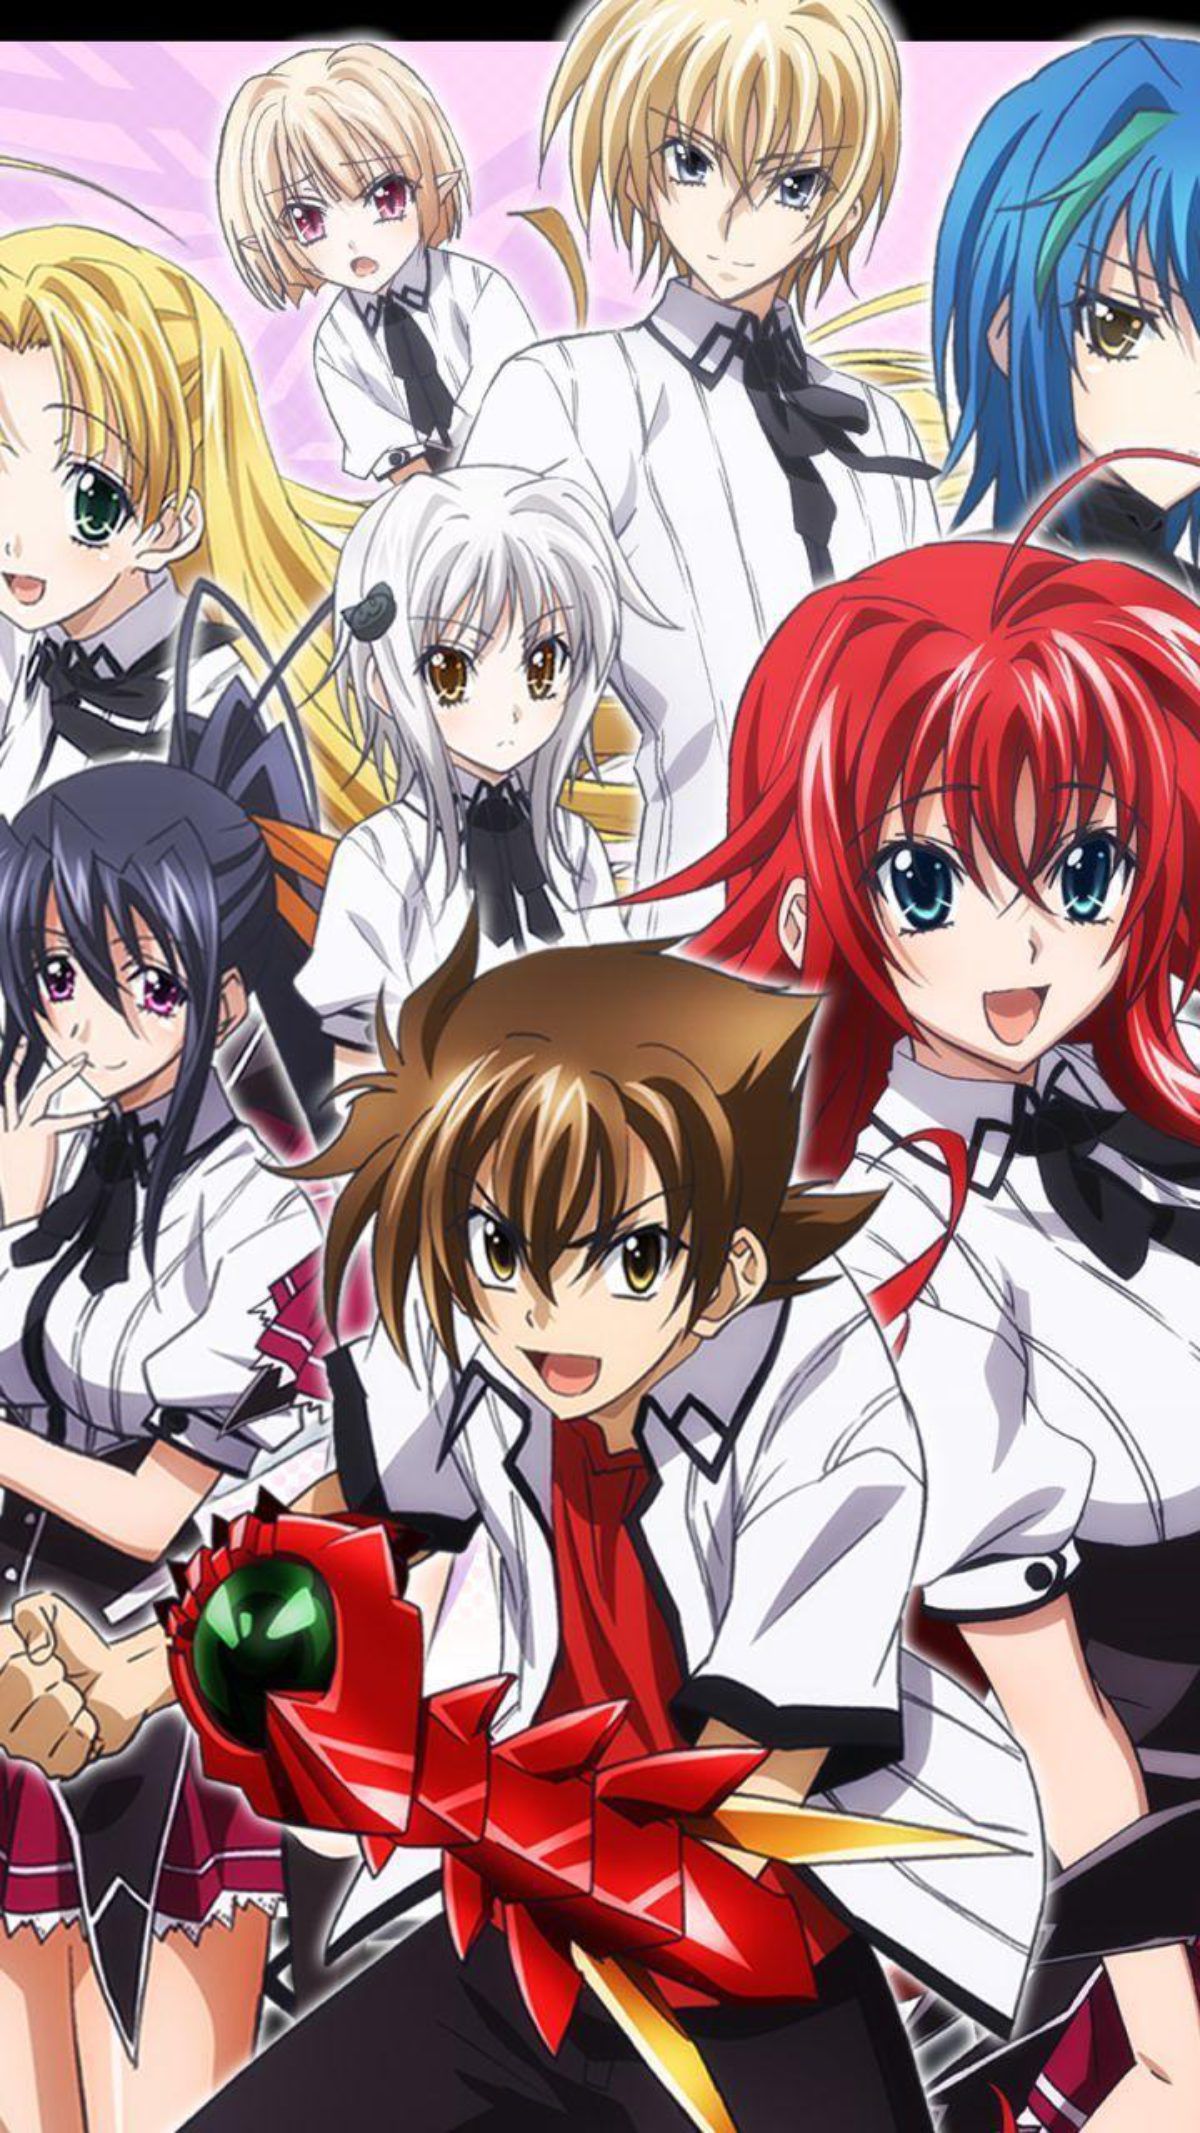 HIGH SCHOOL DXD season five cancelled? Do the fans of the manga